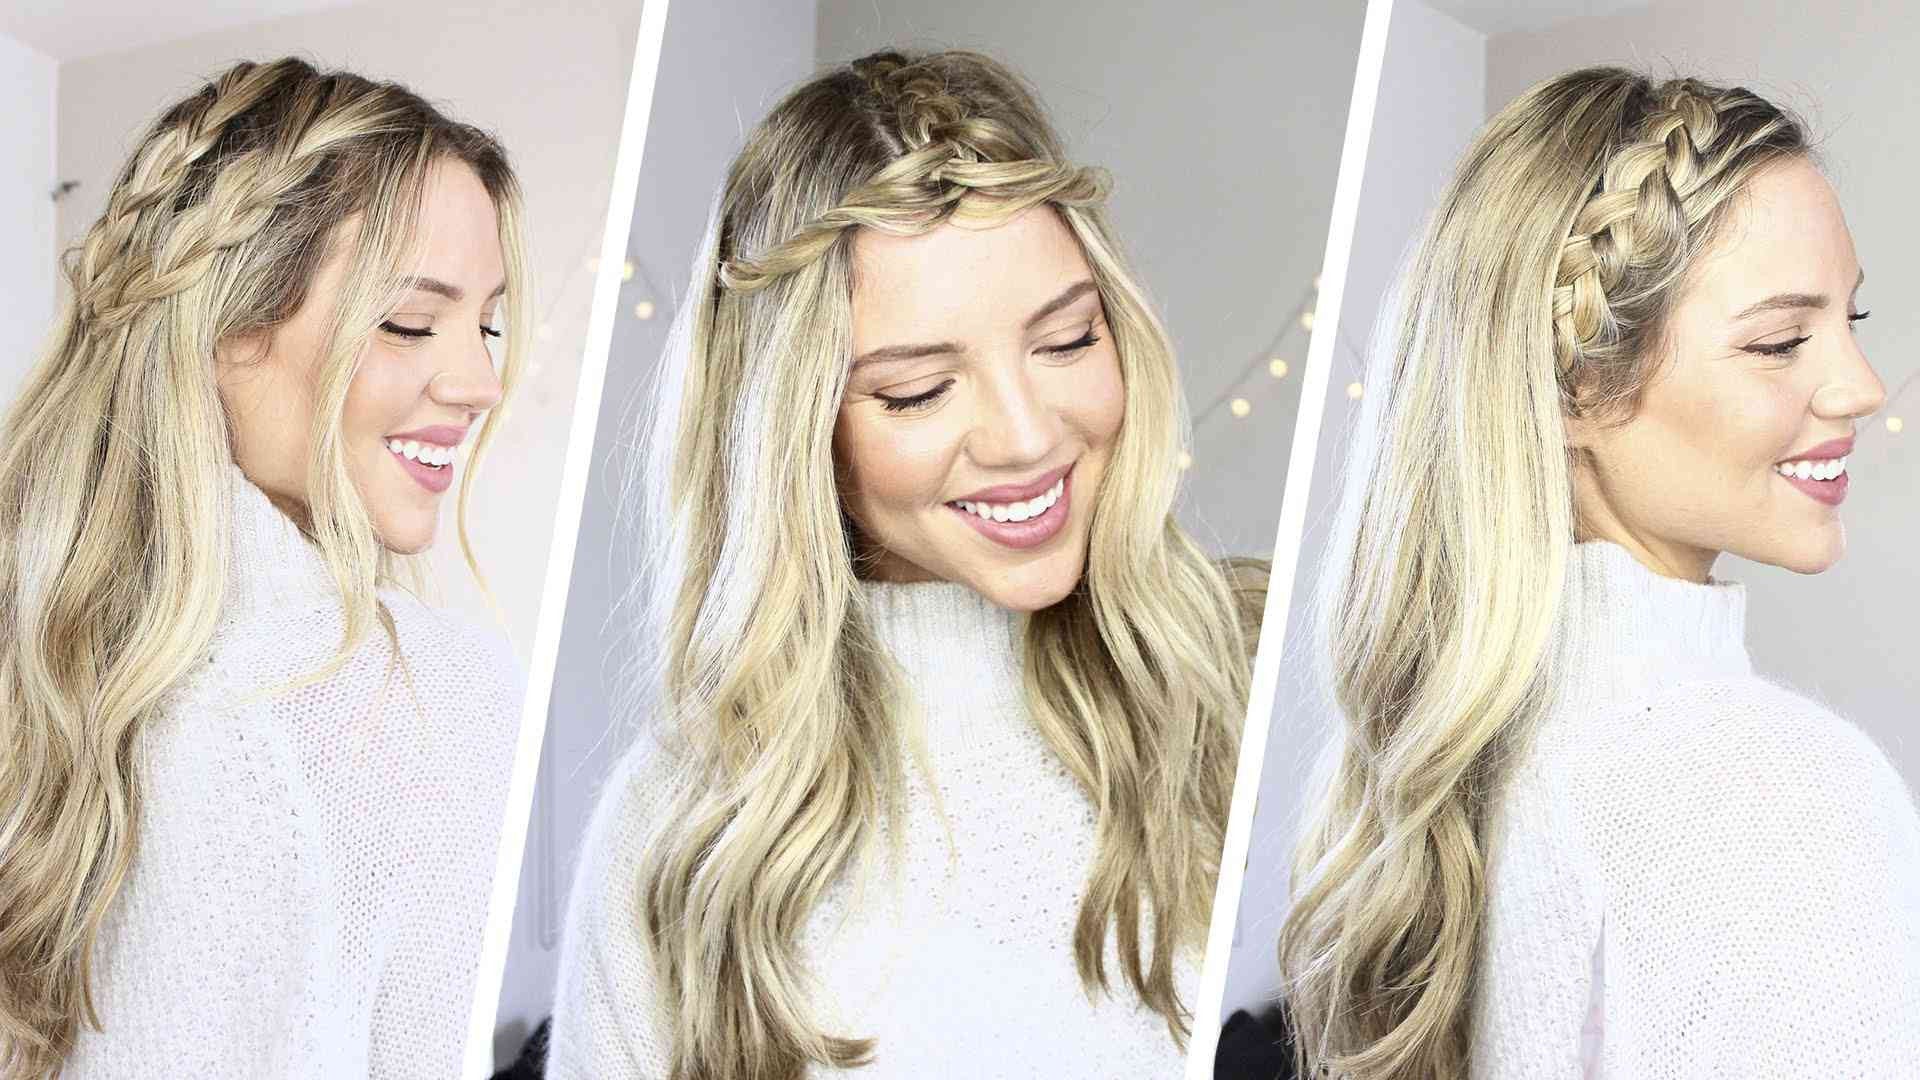 15 Curly Braid Hairstyles That Put a Fun Spin on the Look